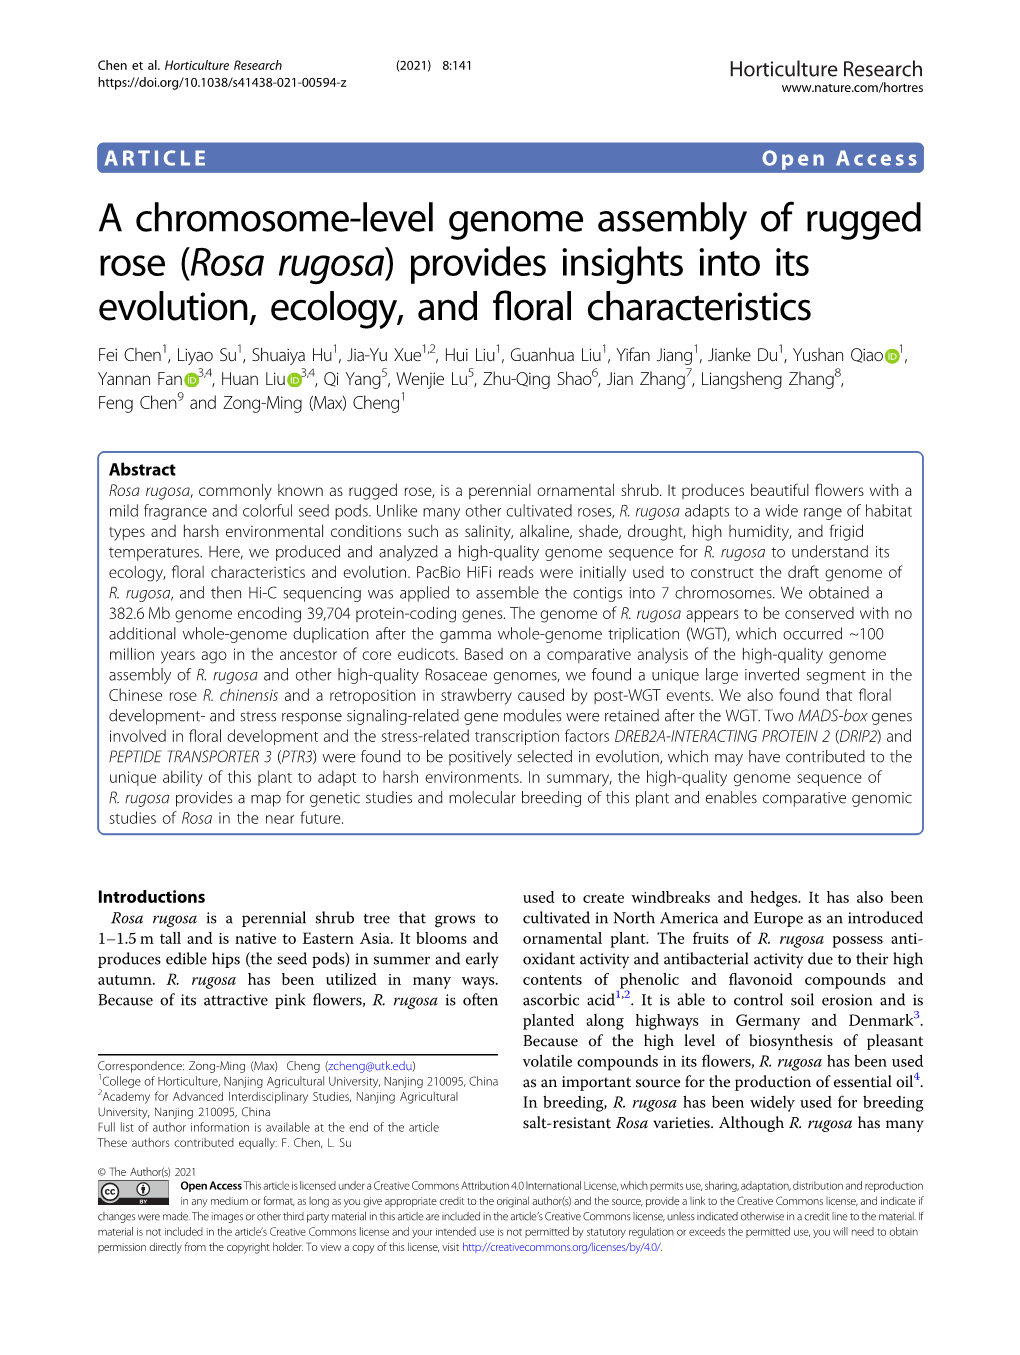 A Chromosome-Level Genome Assembly of Rugged Rose